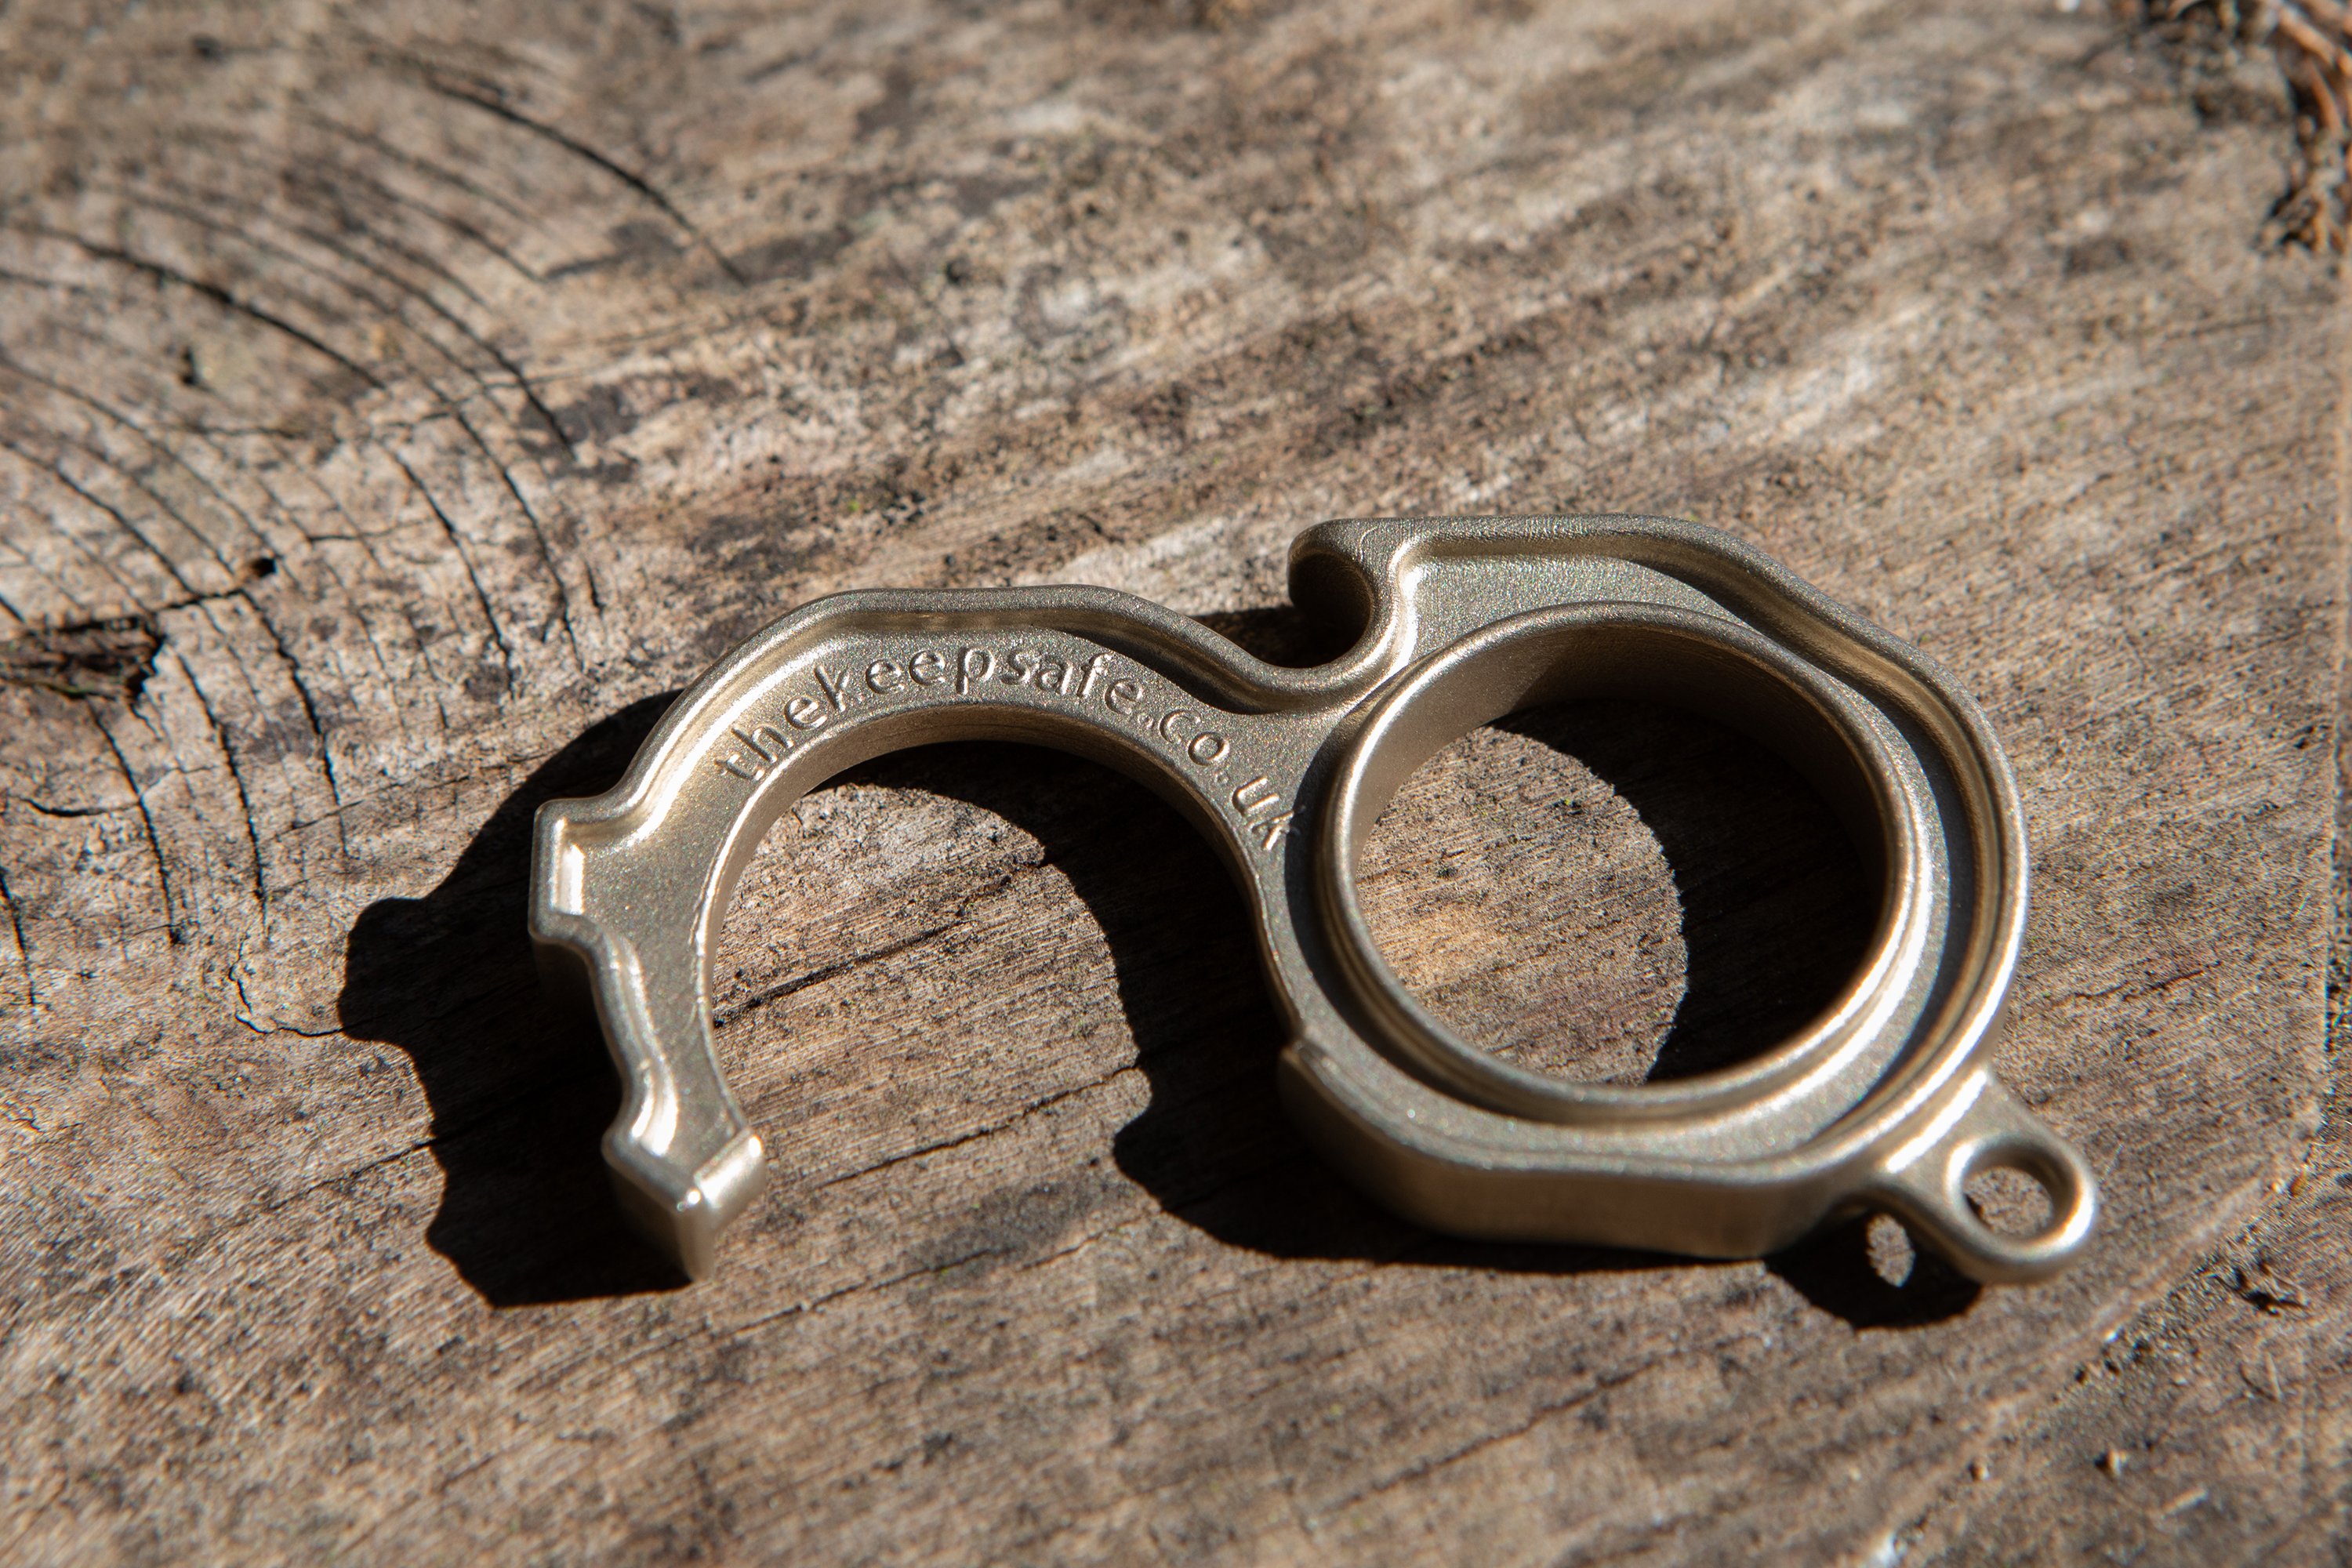 Image of the Keepsafe, which looks like a chunky ring, with a sort of semi-circular hook extending out, to allow people to engage with items without touching them. It is a light copper colour.